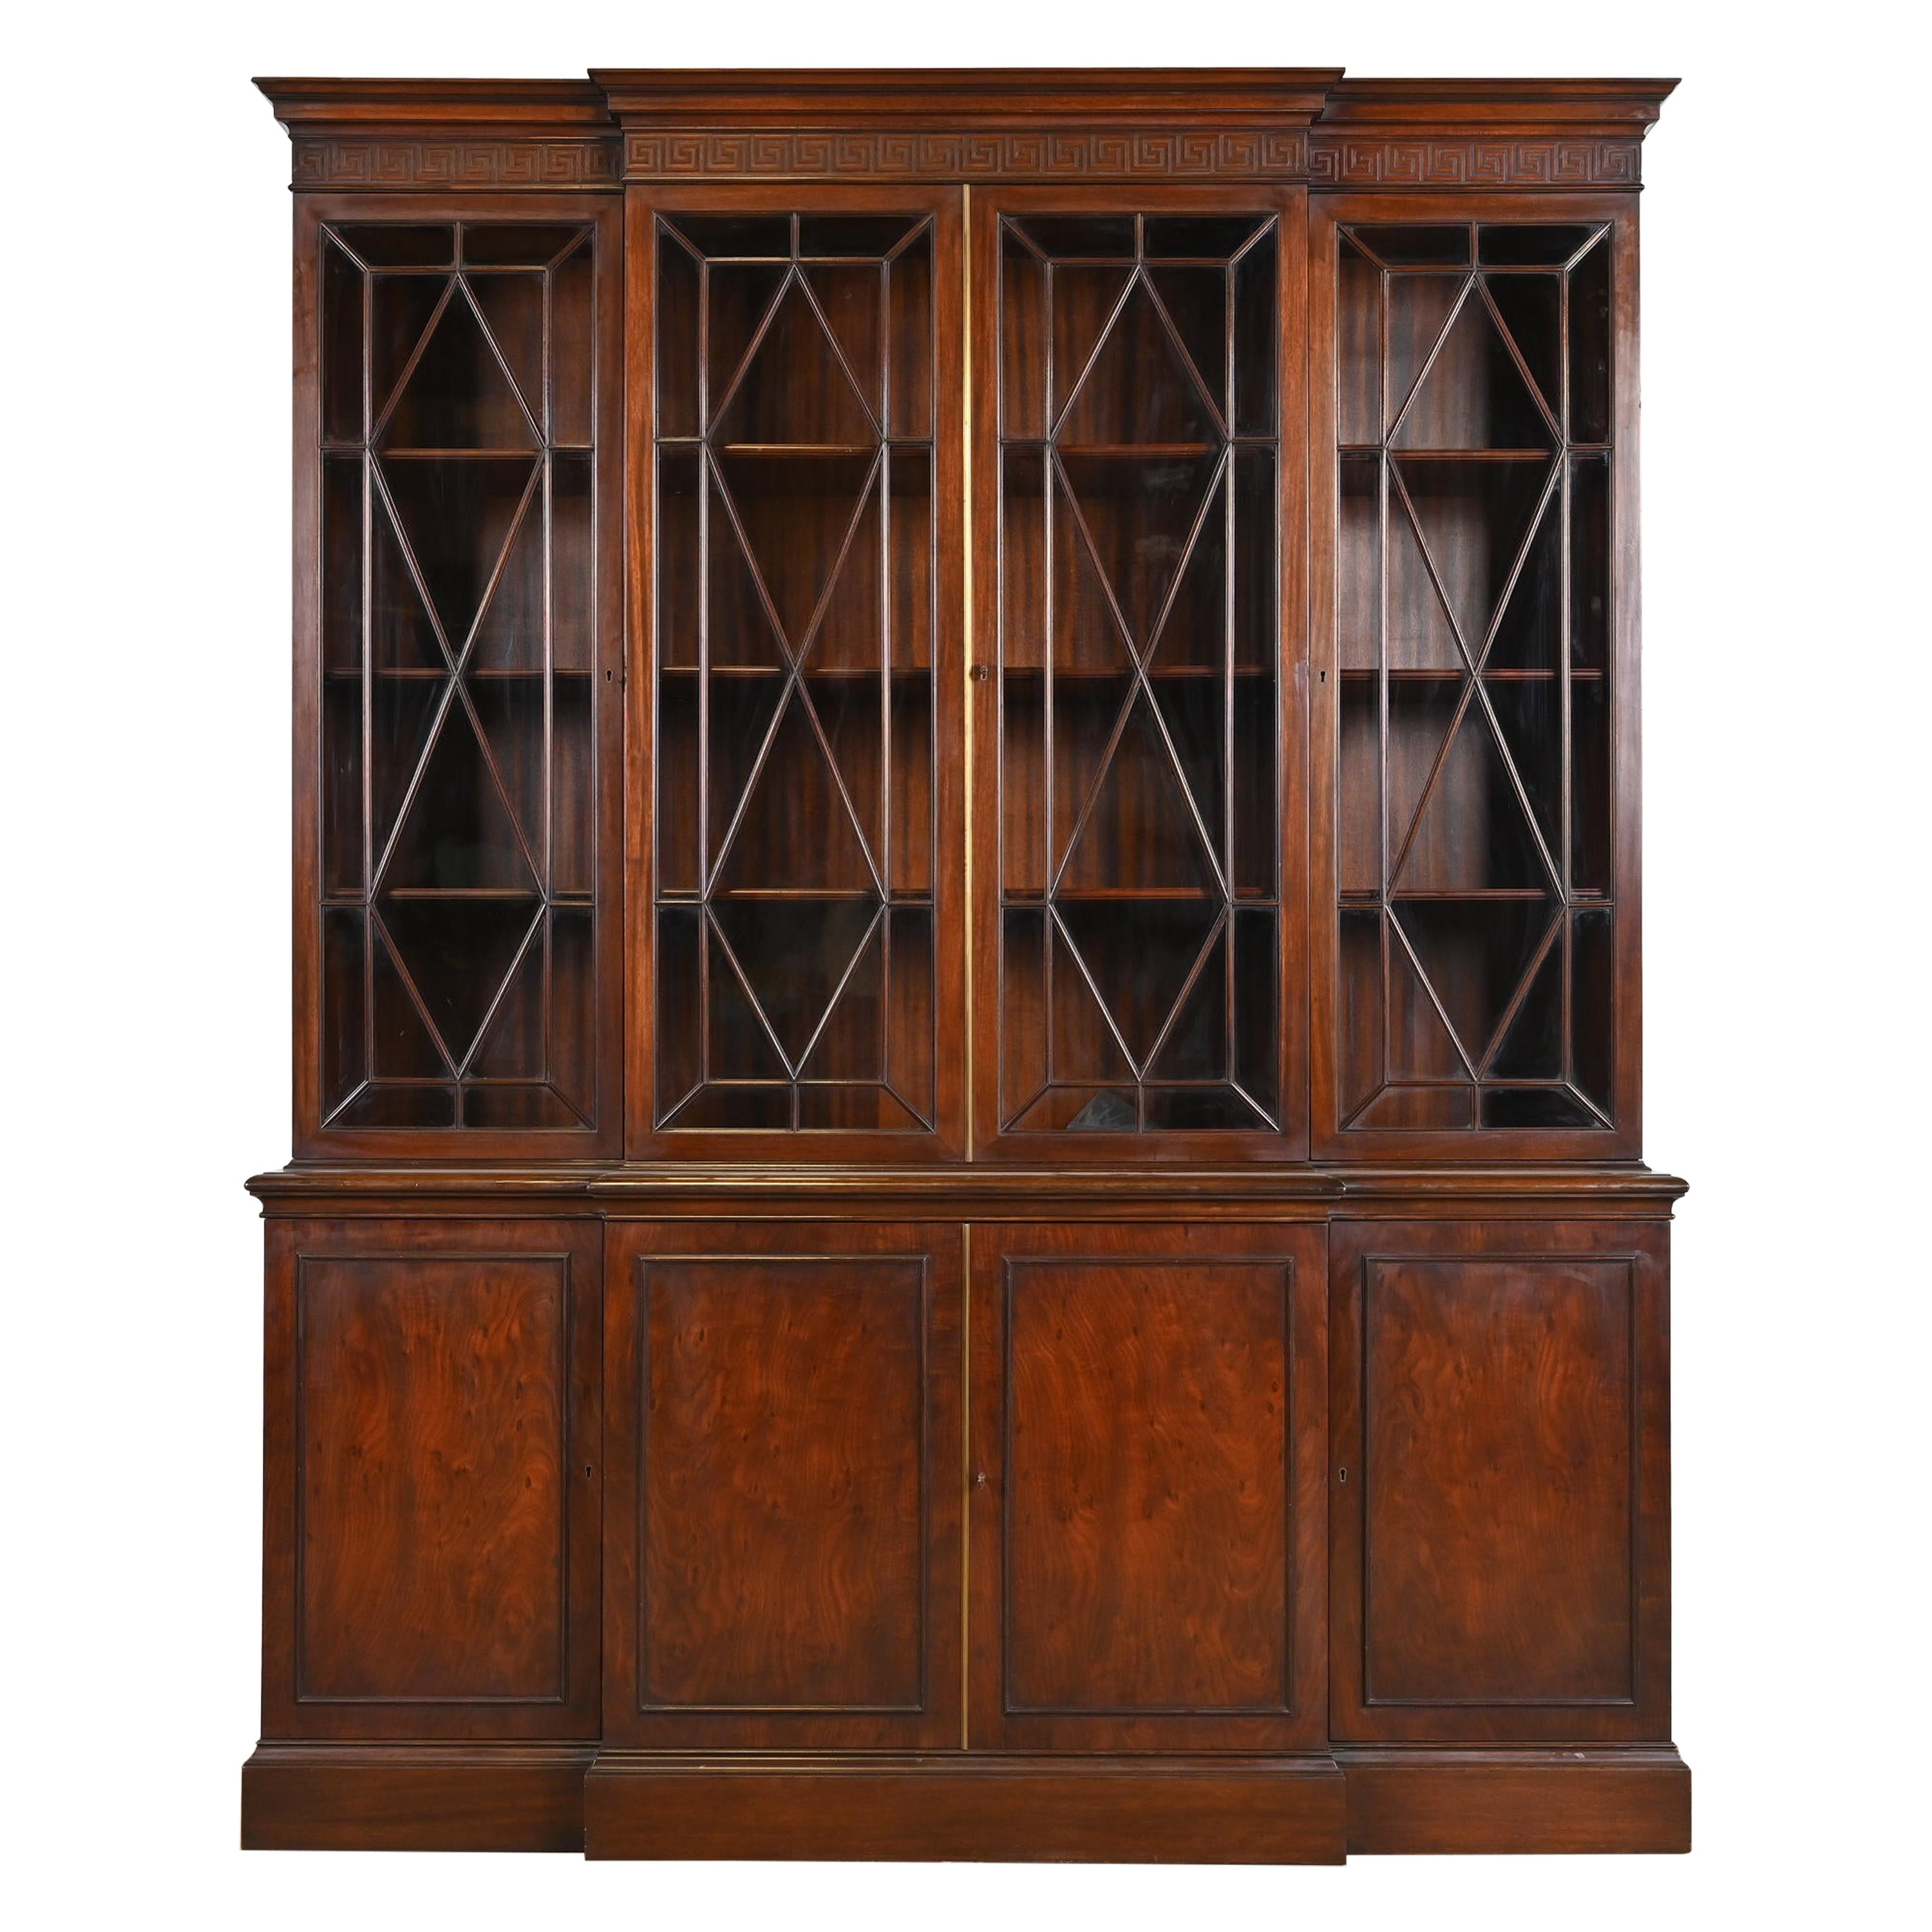 Schmieg & Kotzian Georgian Carved Mahogany Breakfront Bookcase Cabinet, 1940s For Sale